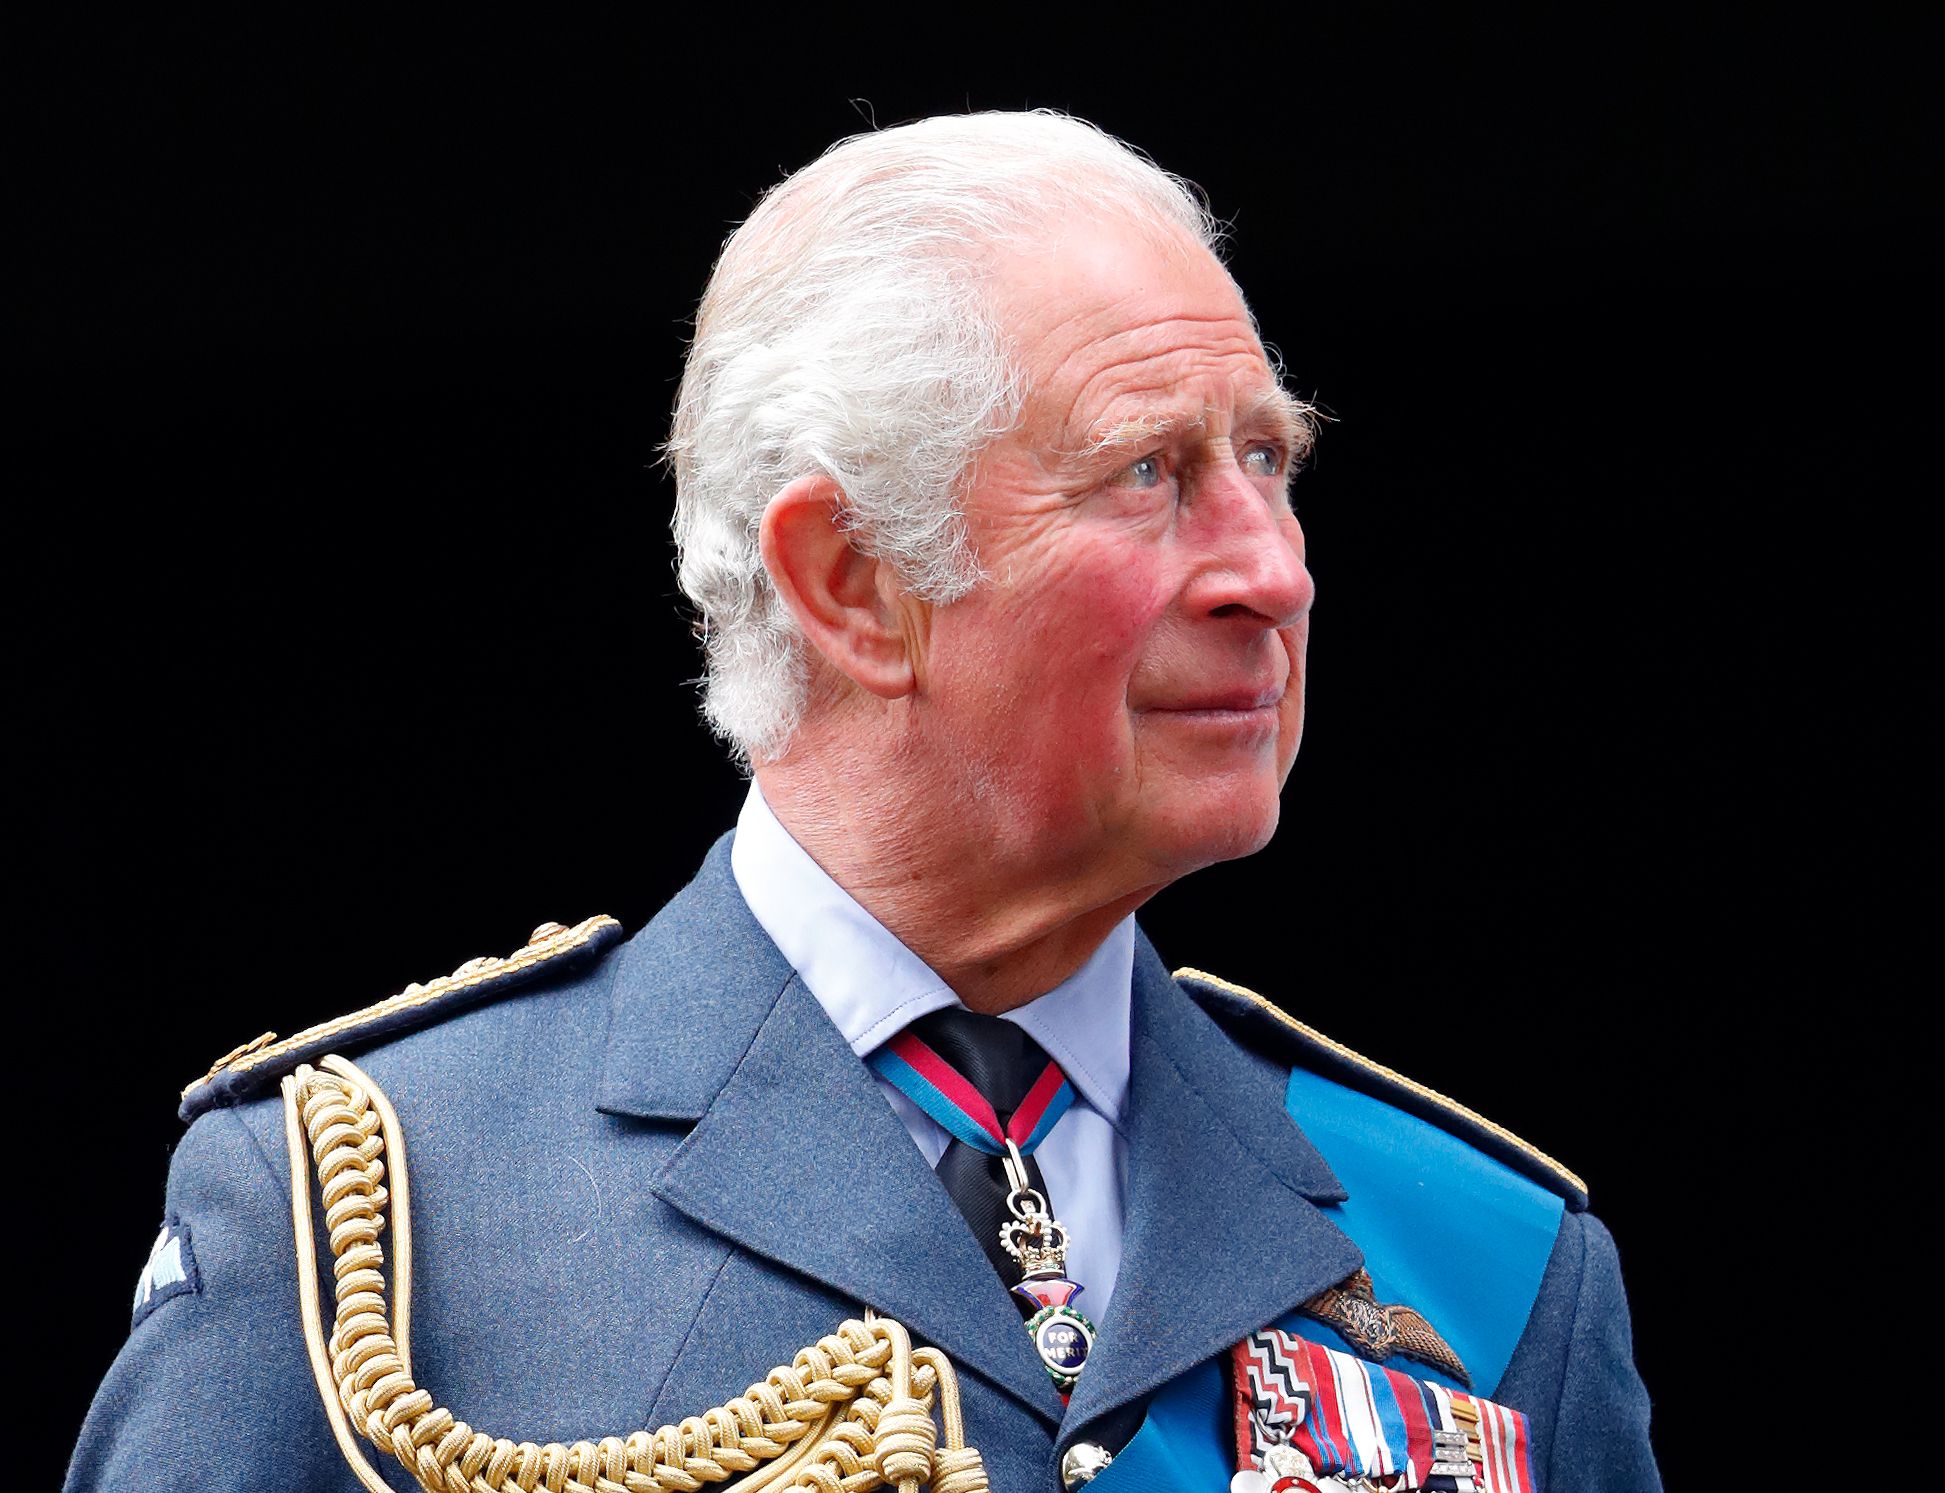 prince charles prince of wales watches a spitfire and news photo 1662653440